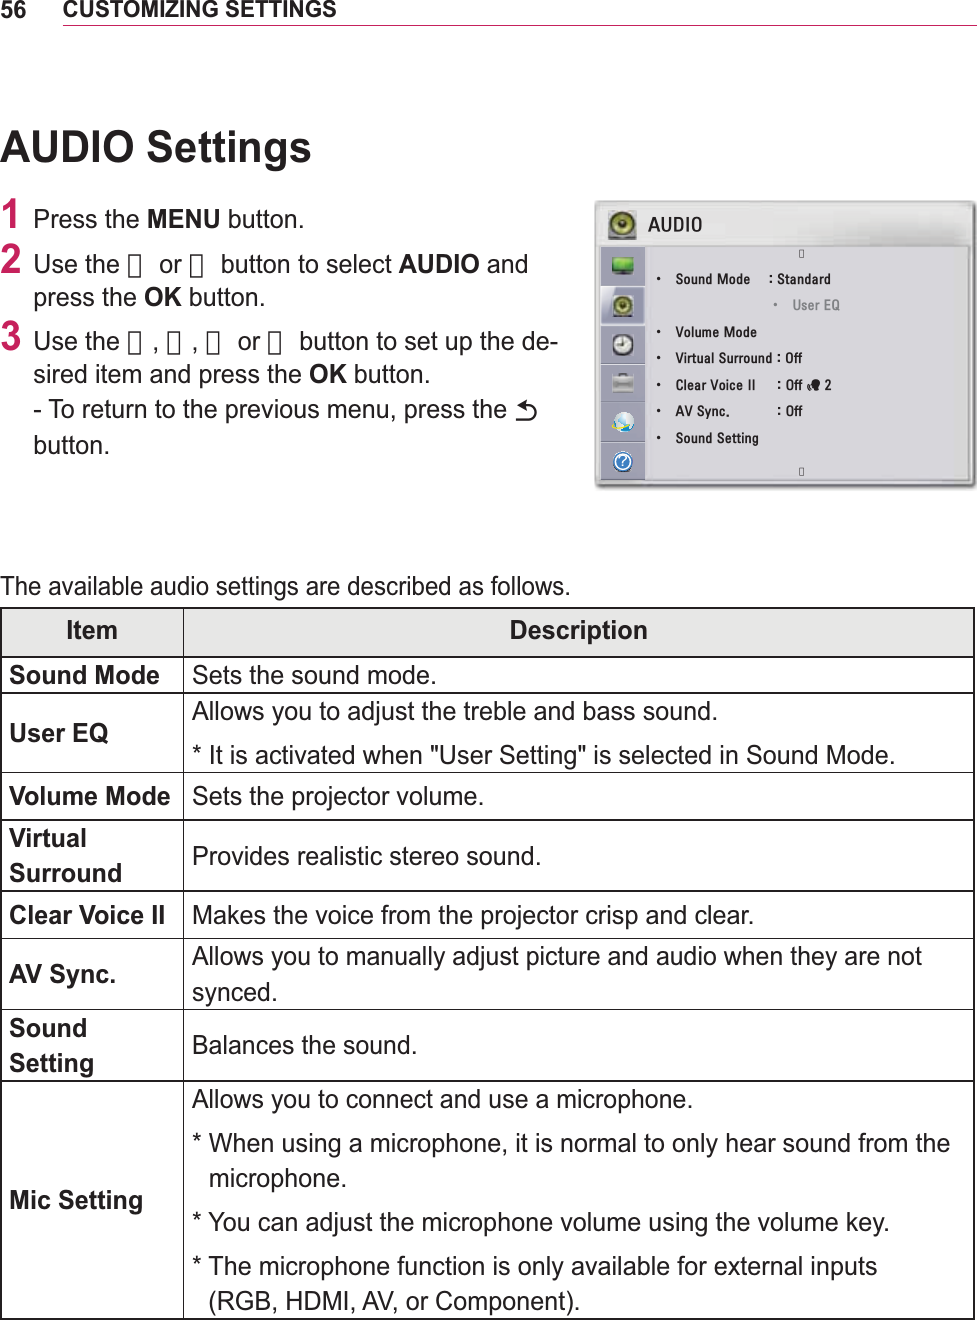 56CUSTOMIZING SETTINGSAUDIO Settings1 Press the MENU button.2 Use the 󱛨 or 󱛩 button to select AUDIO and press the OK button.3 Use the 󱛨, 󱛩, 󱛦 or 󱛧 button to set up the de-sired item and press the OK button.- To return to the previous menu, press the ᰳ button.The available audio settings are described as follows.Item DescriptionSound Mode Sets the sound mode.User EQ Allows you to adjust the treble and bass sound.* It is activated when &quot;User Setting&quot; is selected in Sound Mode.Volume Mode Sets the projector volume.Virtual  Surround Provides realistic stereo sound.Clear Voice II Makes the voice from the projector crisp and clear. AV Sync.Allows you to manually adjust picture and audio when they are not synced.Sound  SettingBalances the sound.Mic SettingAllows you to connect and use a microphone. *  When using a microphone, it is normal to only hear sound from the microphone.* You can adjust the microphone volume using the volume key. Ͱ$8&apos;,2󱛨ؒ 6RXQG0RGH 6WDQGDUGؒ 8VHU(4ؒ 9ROXPH0RGHؒ 9LUWXDO6XUURXQG2IIؒ &amp;OHDU9RLFH,, 2IIᰕؒ $96\QF 2IIؒ 6RXQG6HWWLQJ󱛩